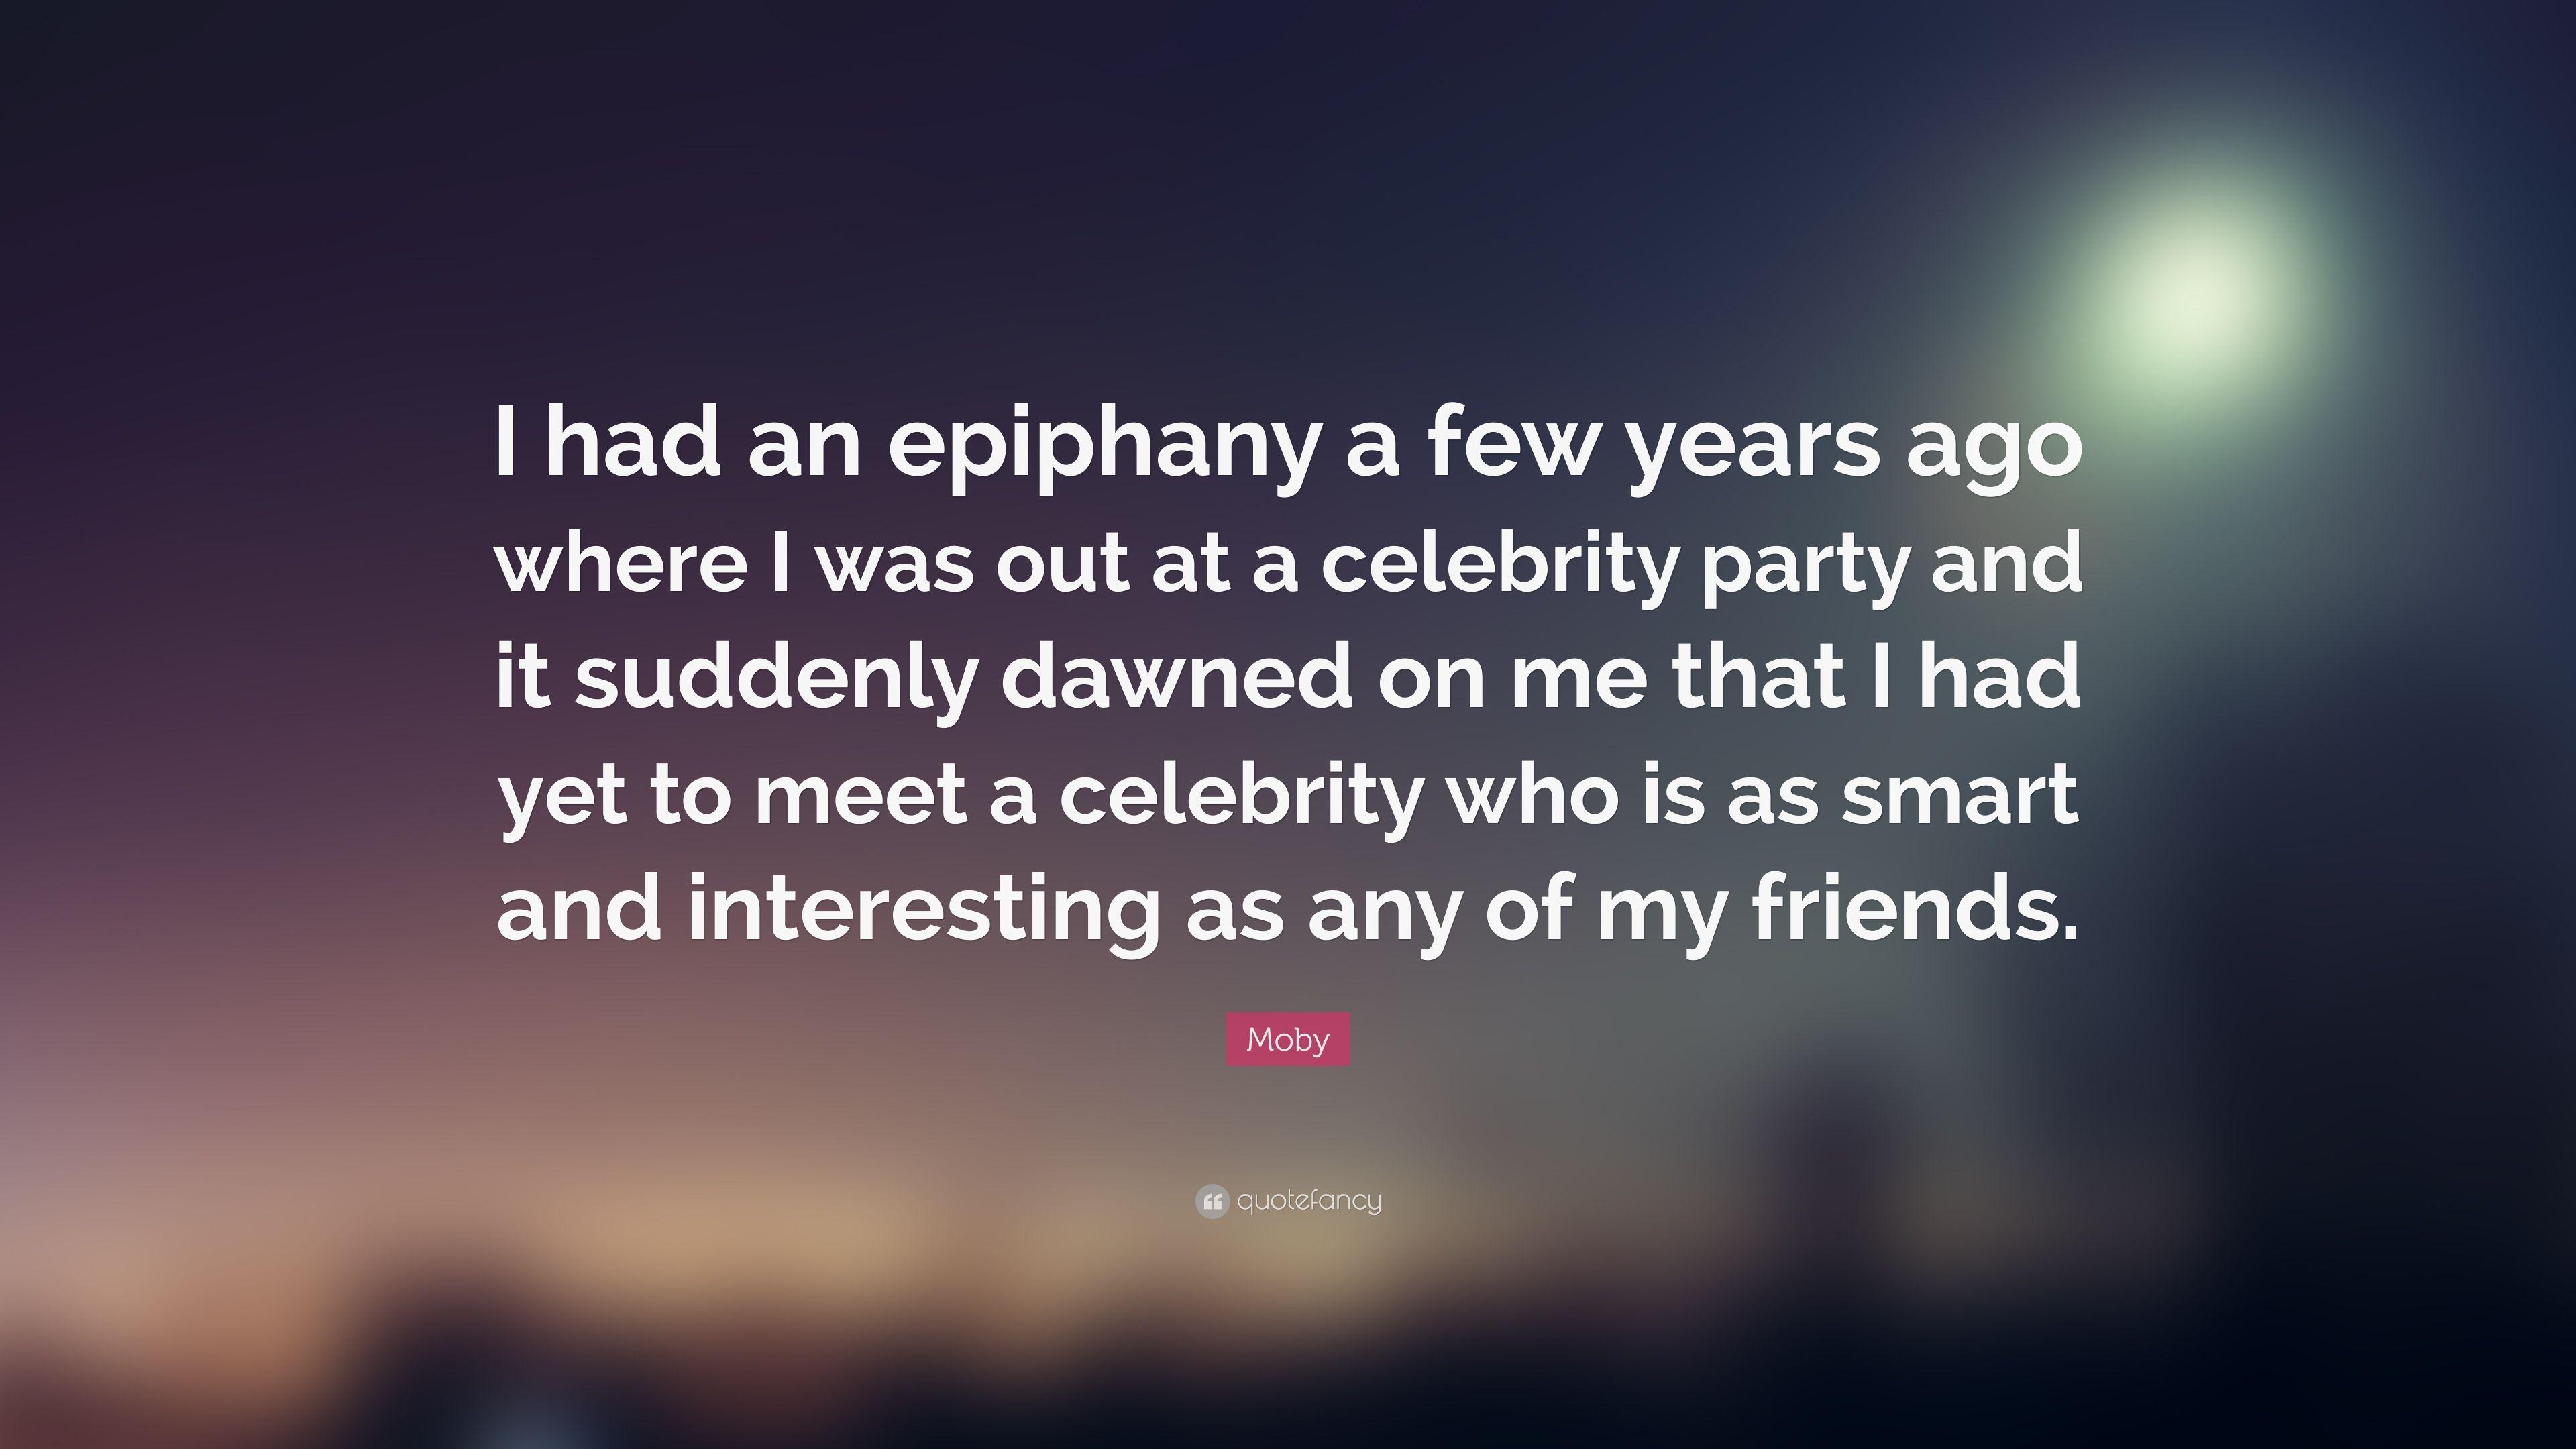 Moby Quote: “I had an epiphany a few years ago where I was out at a